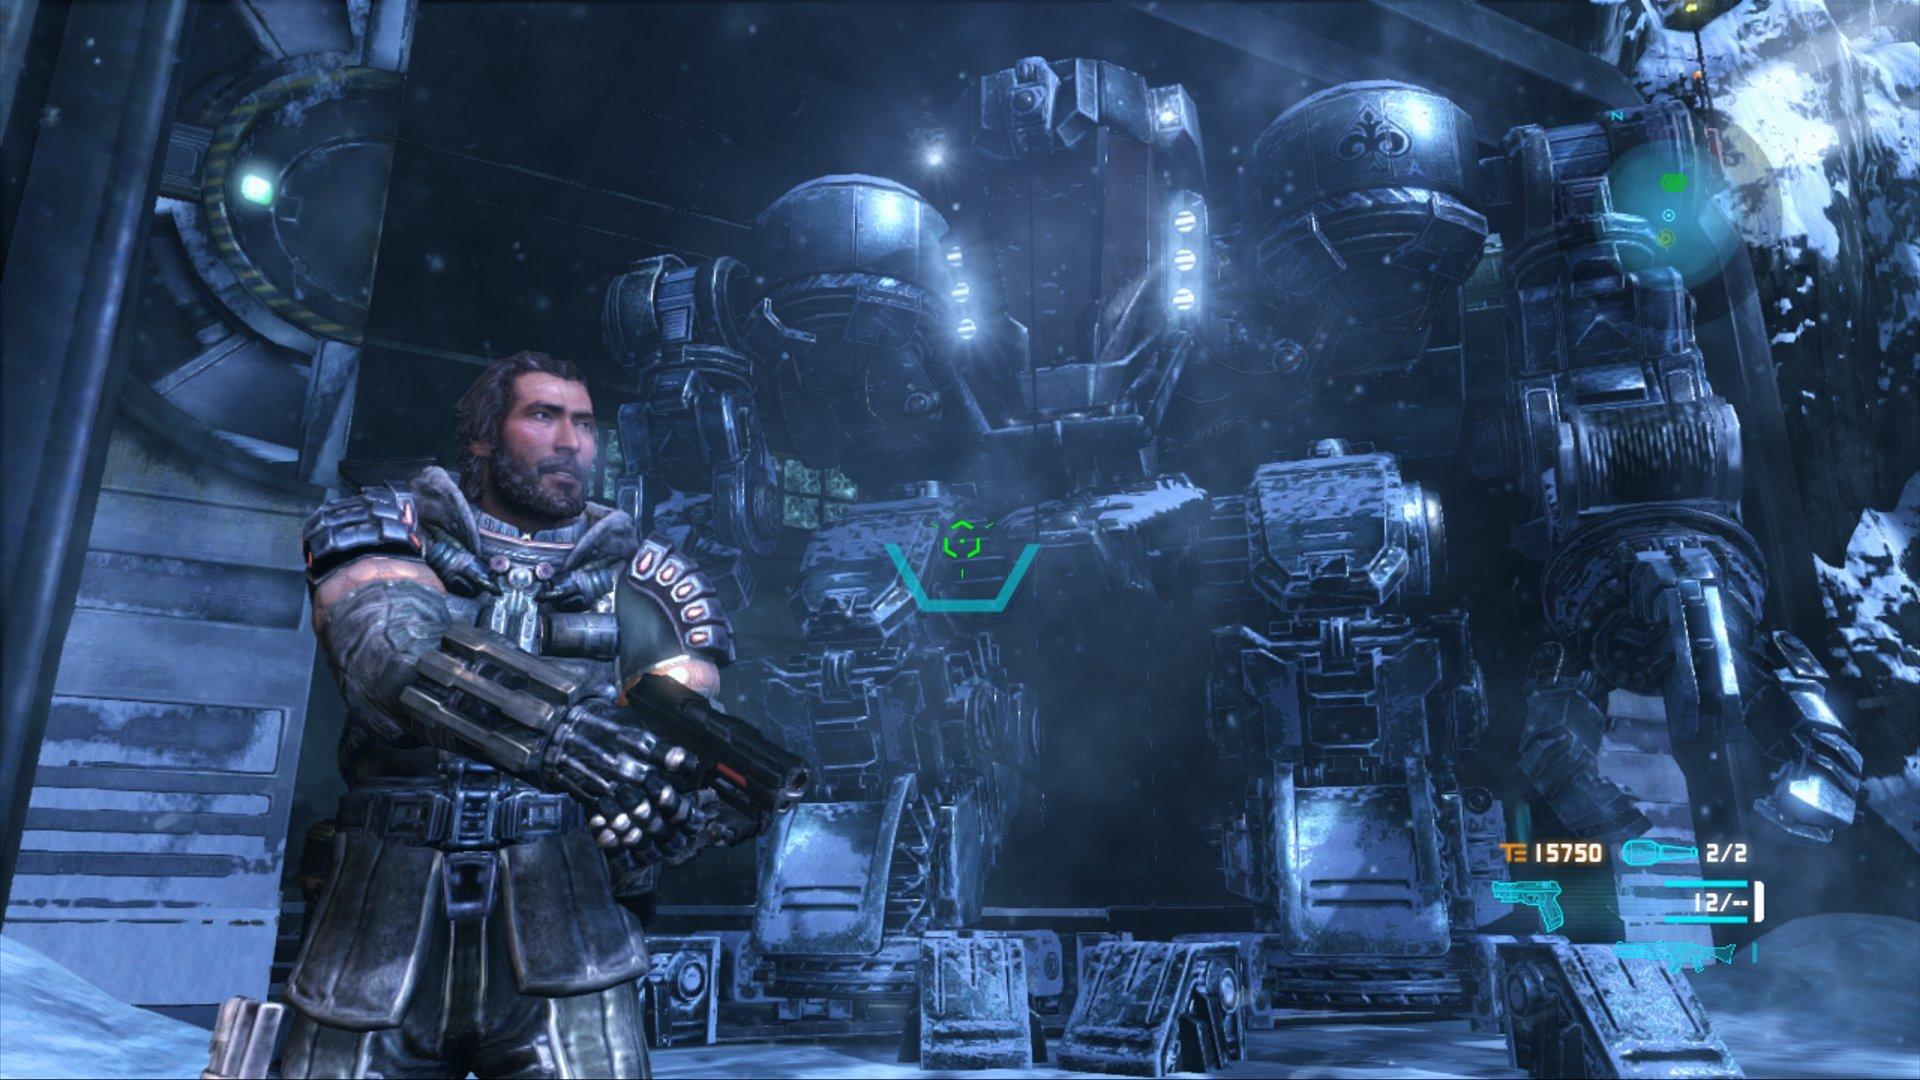 Xbox owners can now claim FOUR free games – including Lost Planet